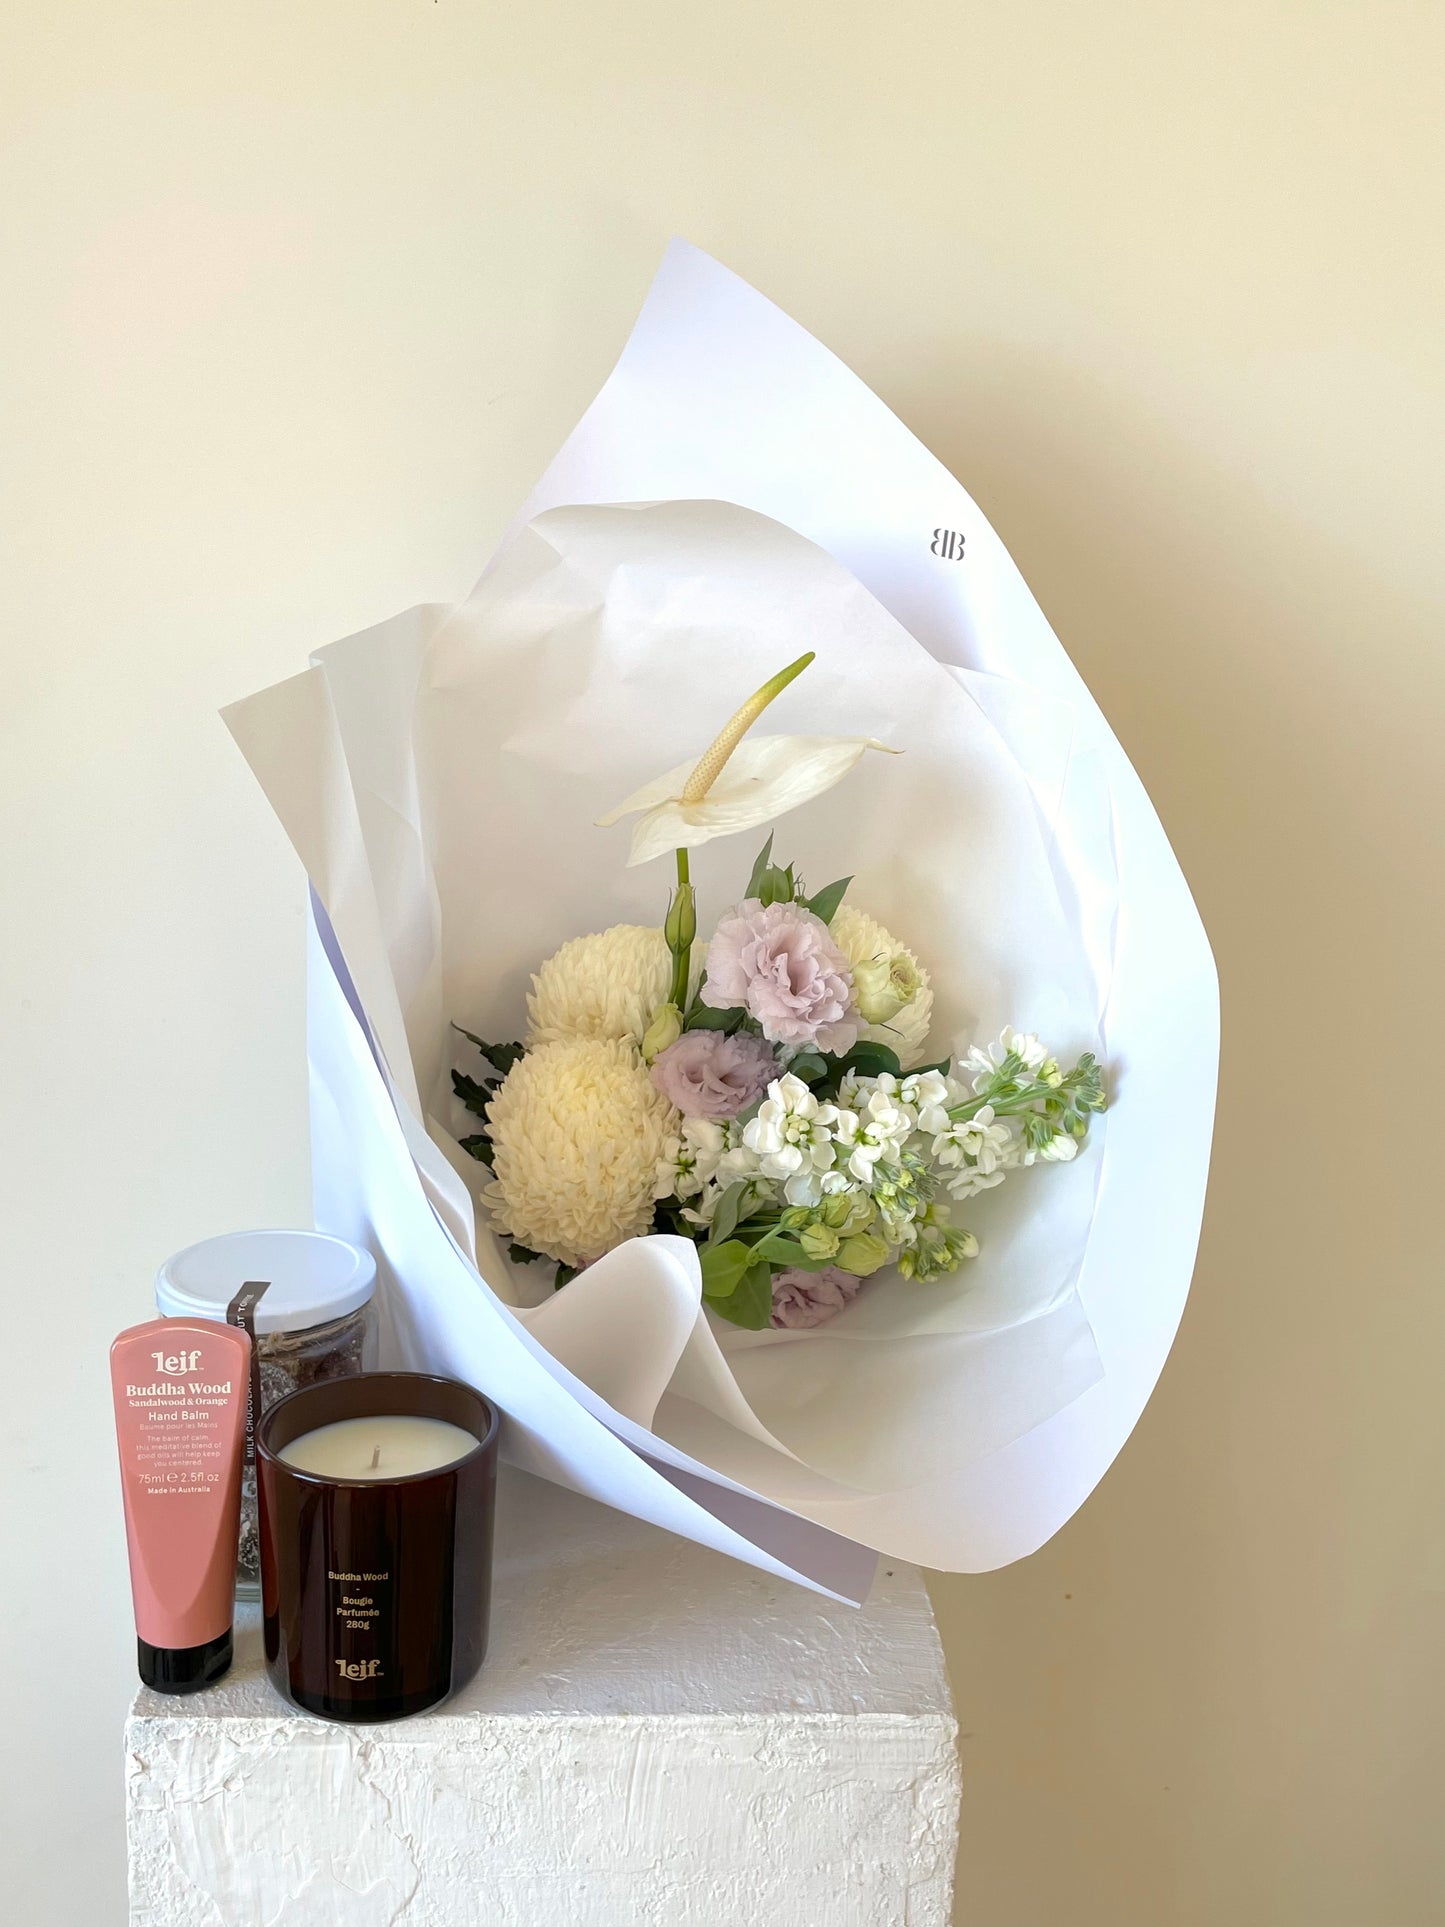 Mothers Day Package